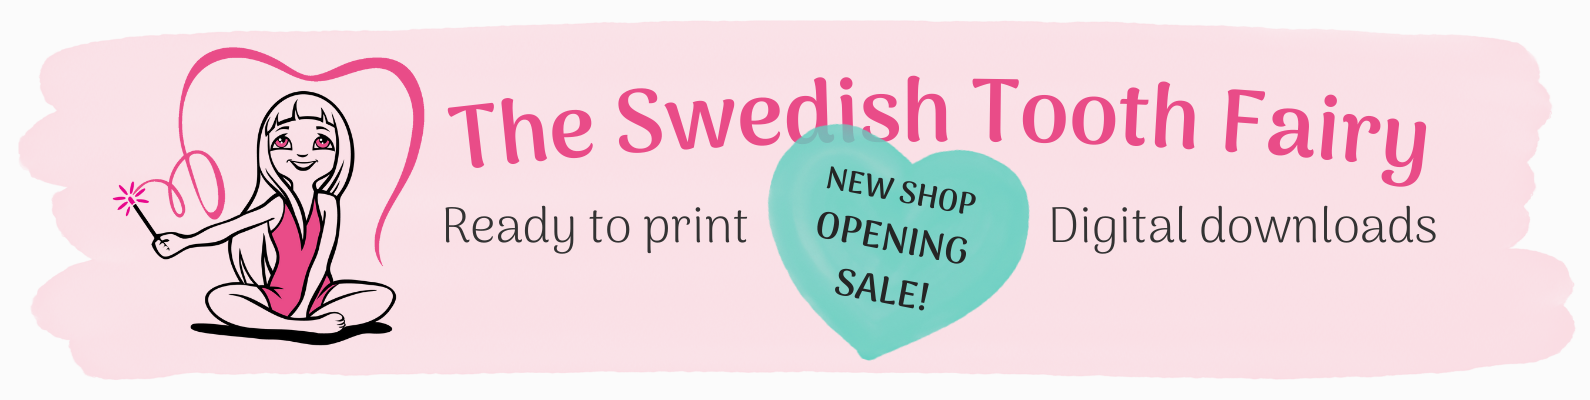 The Swedish Tooth Fairy Etsy Shop